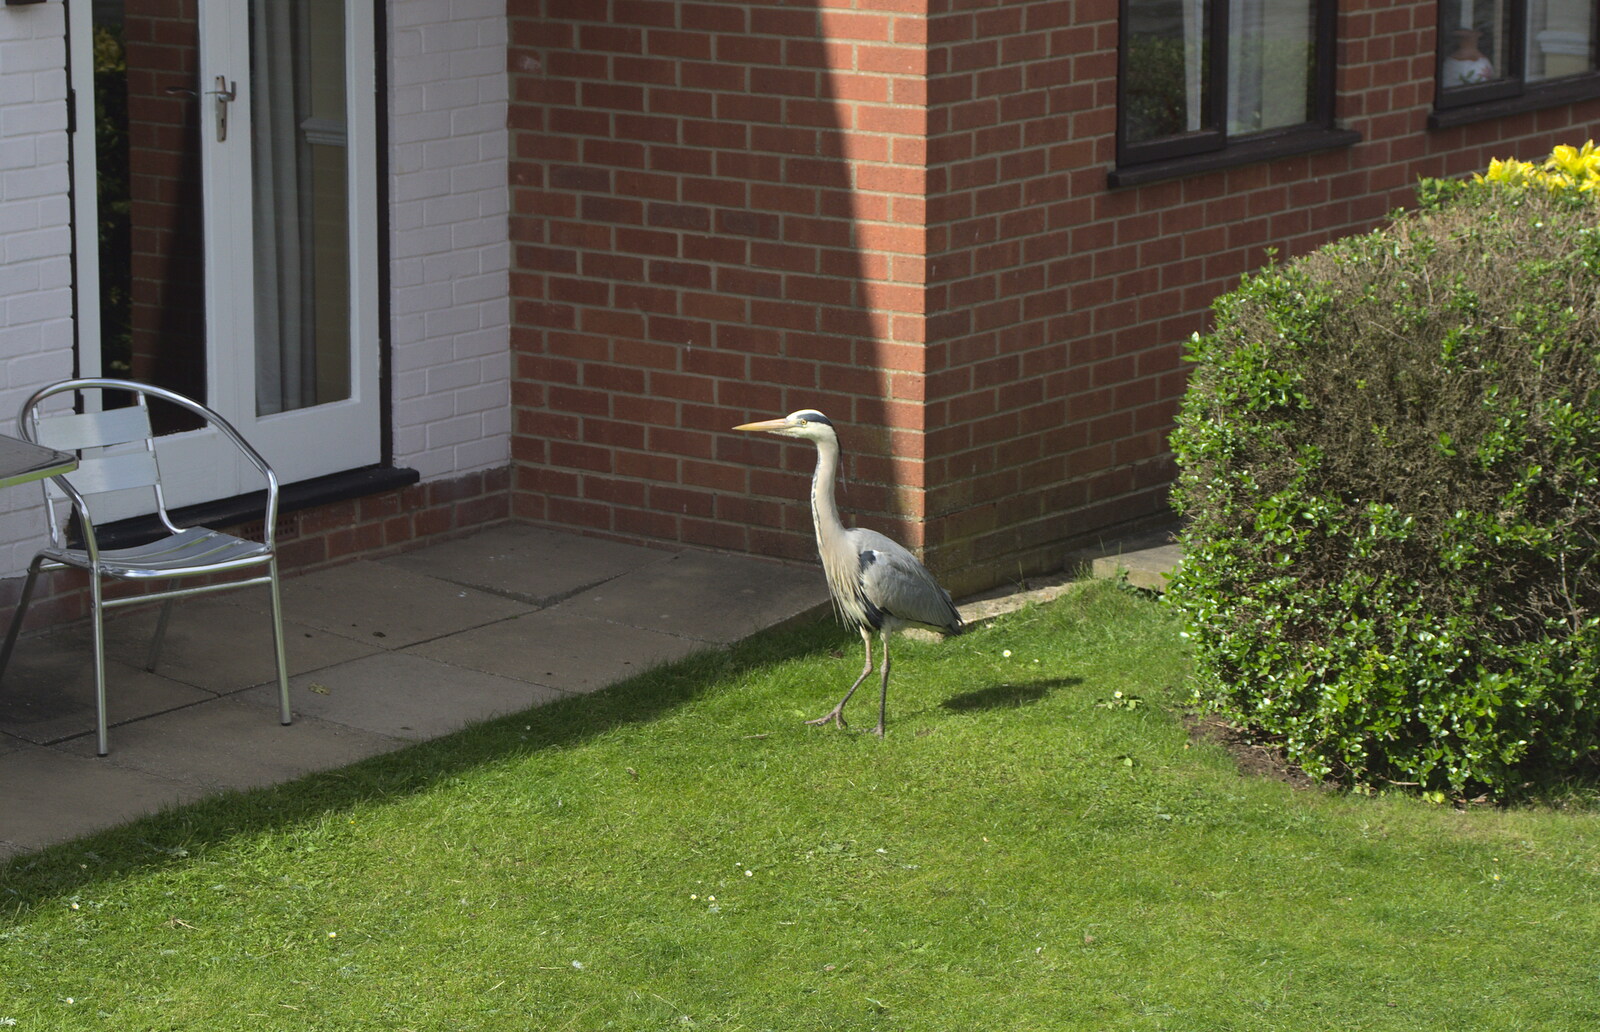 A heron lurks in a front garden from A Trip on the Norfolk Broads, Wroxham, Norfolk - 25th May 2013